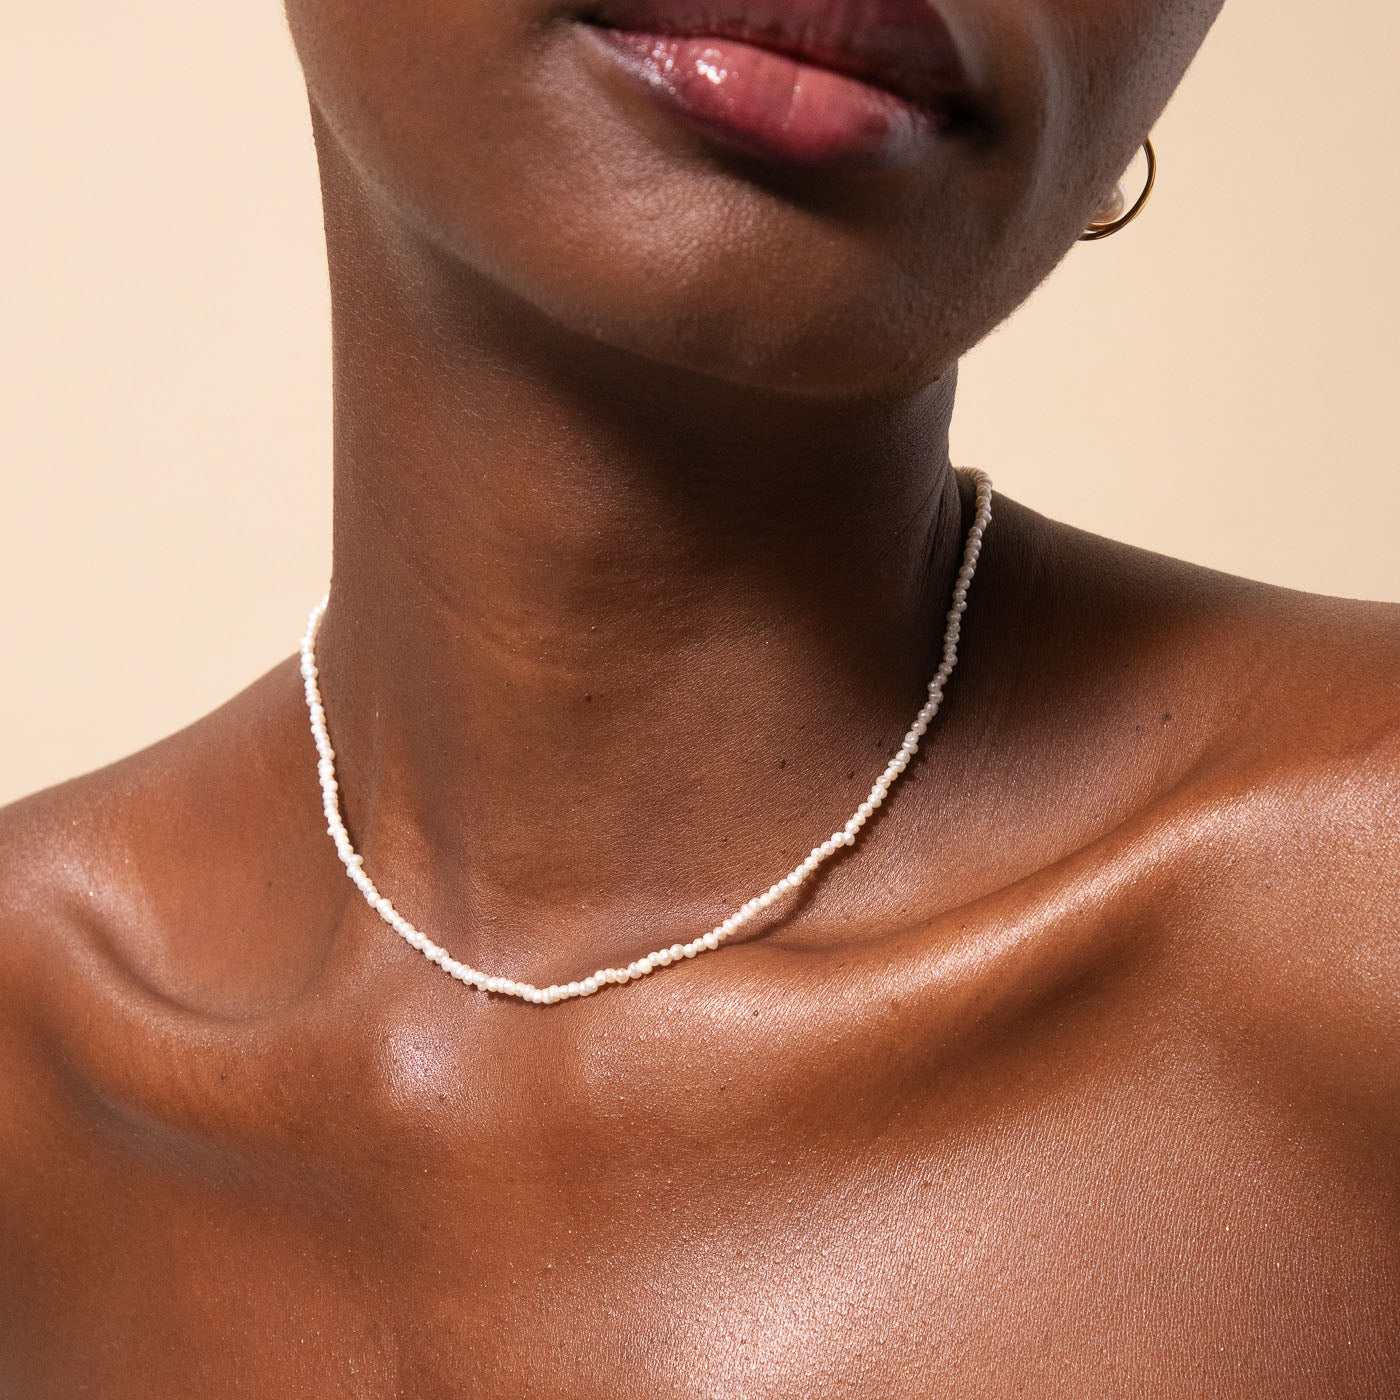 Radiant Pearl Necklace in Gold worn